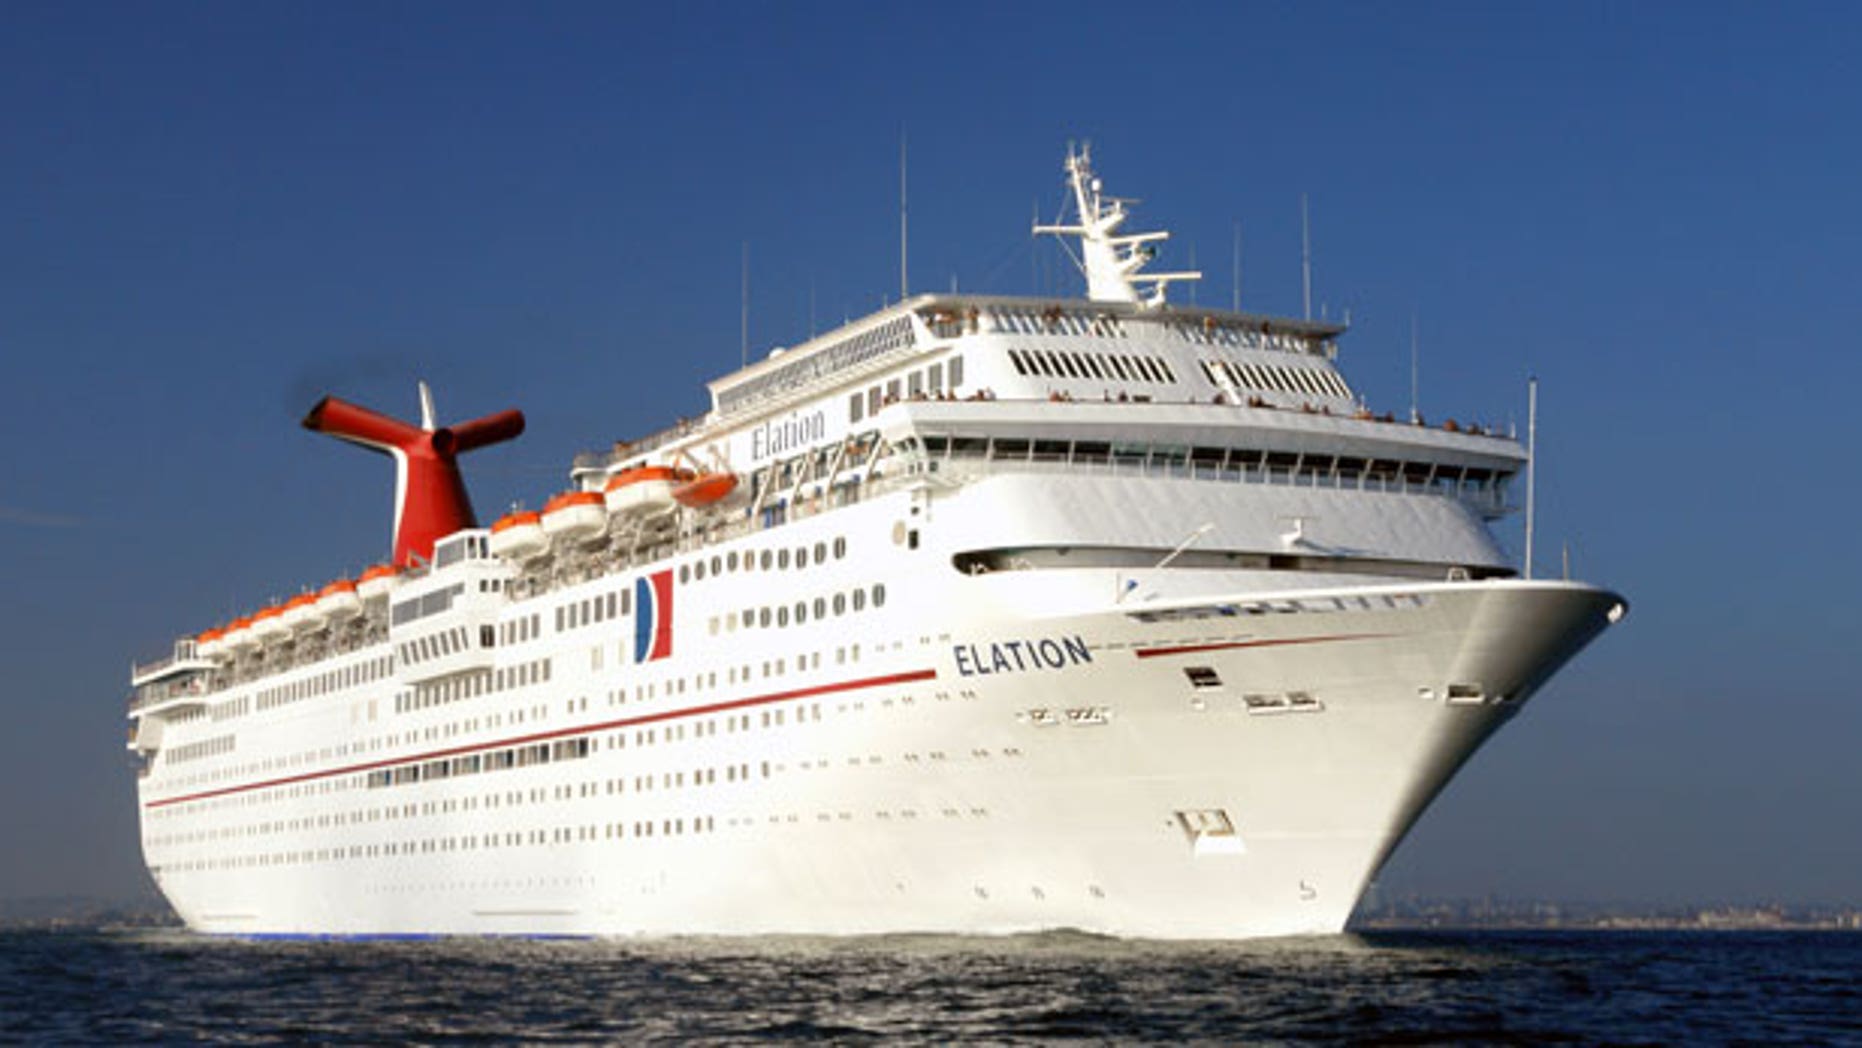 carnival cruise lady died